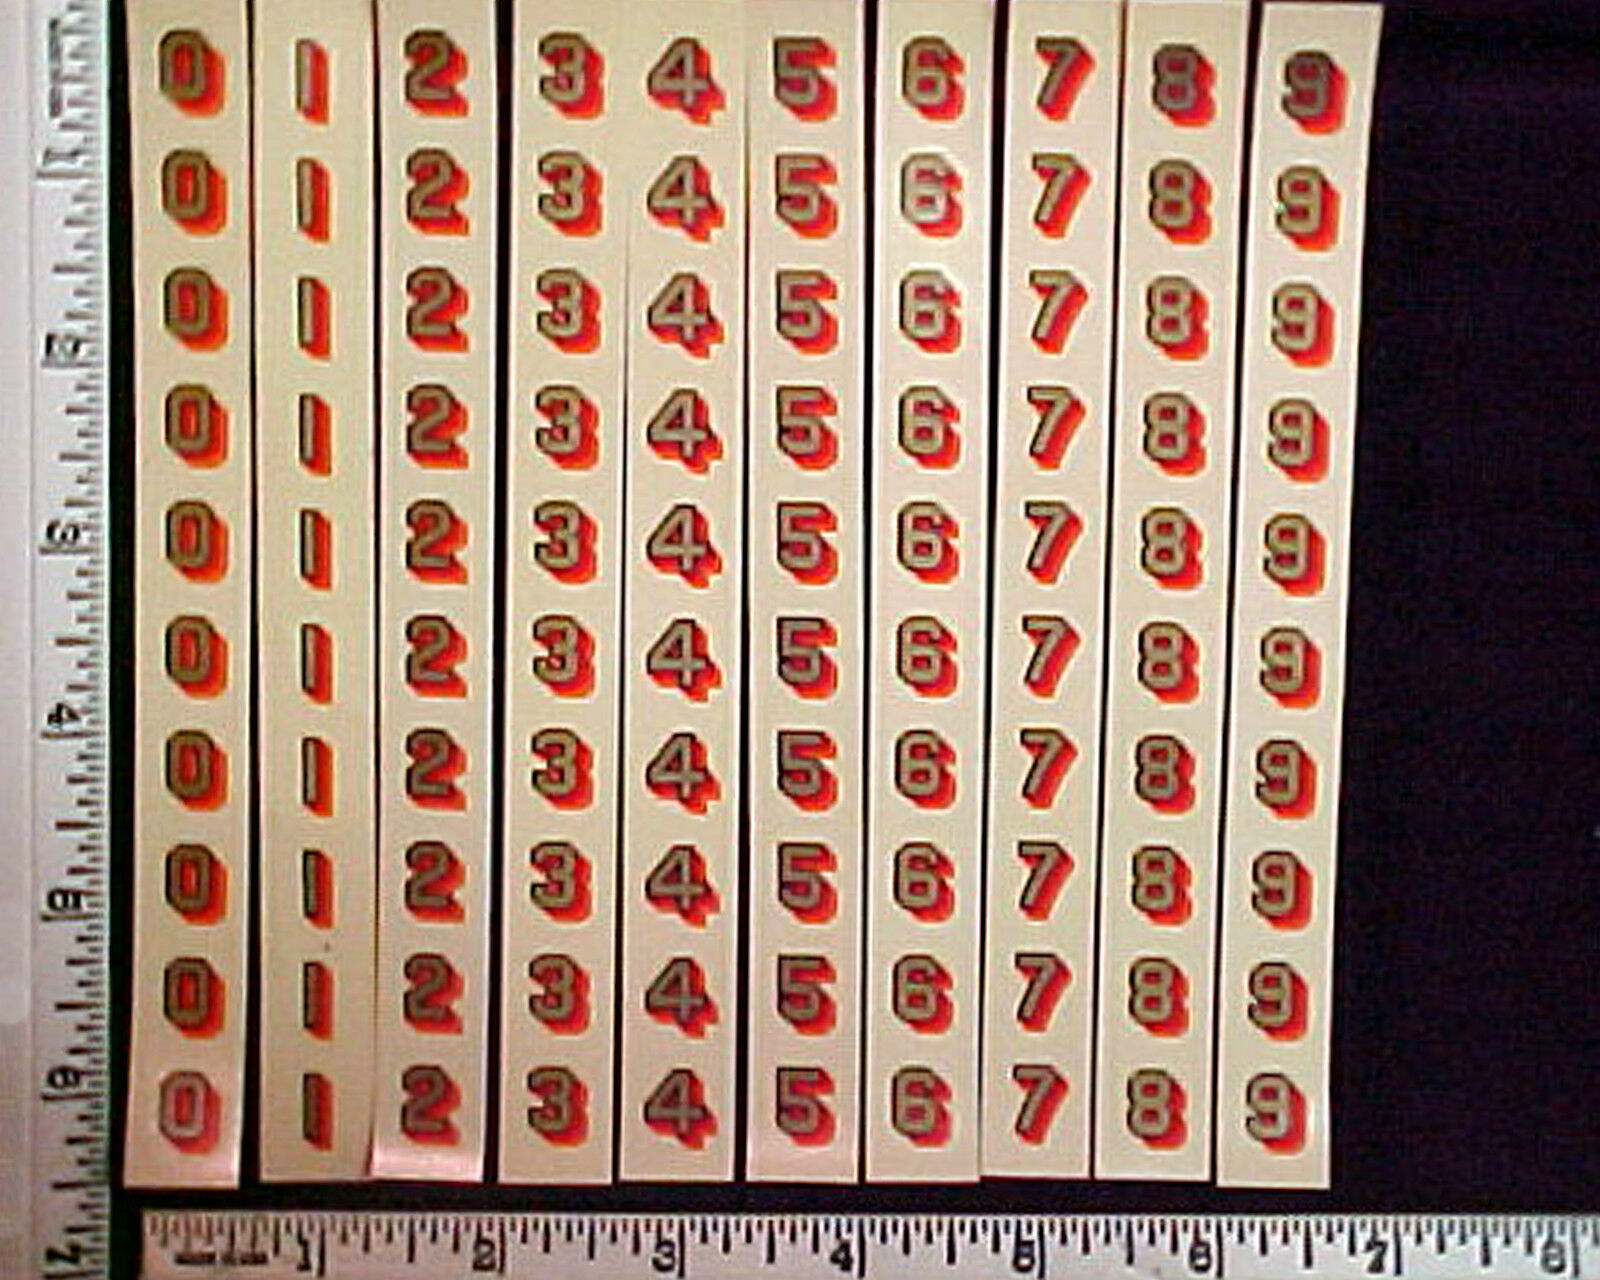 Post Office Box Door Original 100 decals - 4-color - New/Old Stock, Made in USA